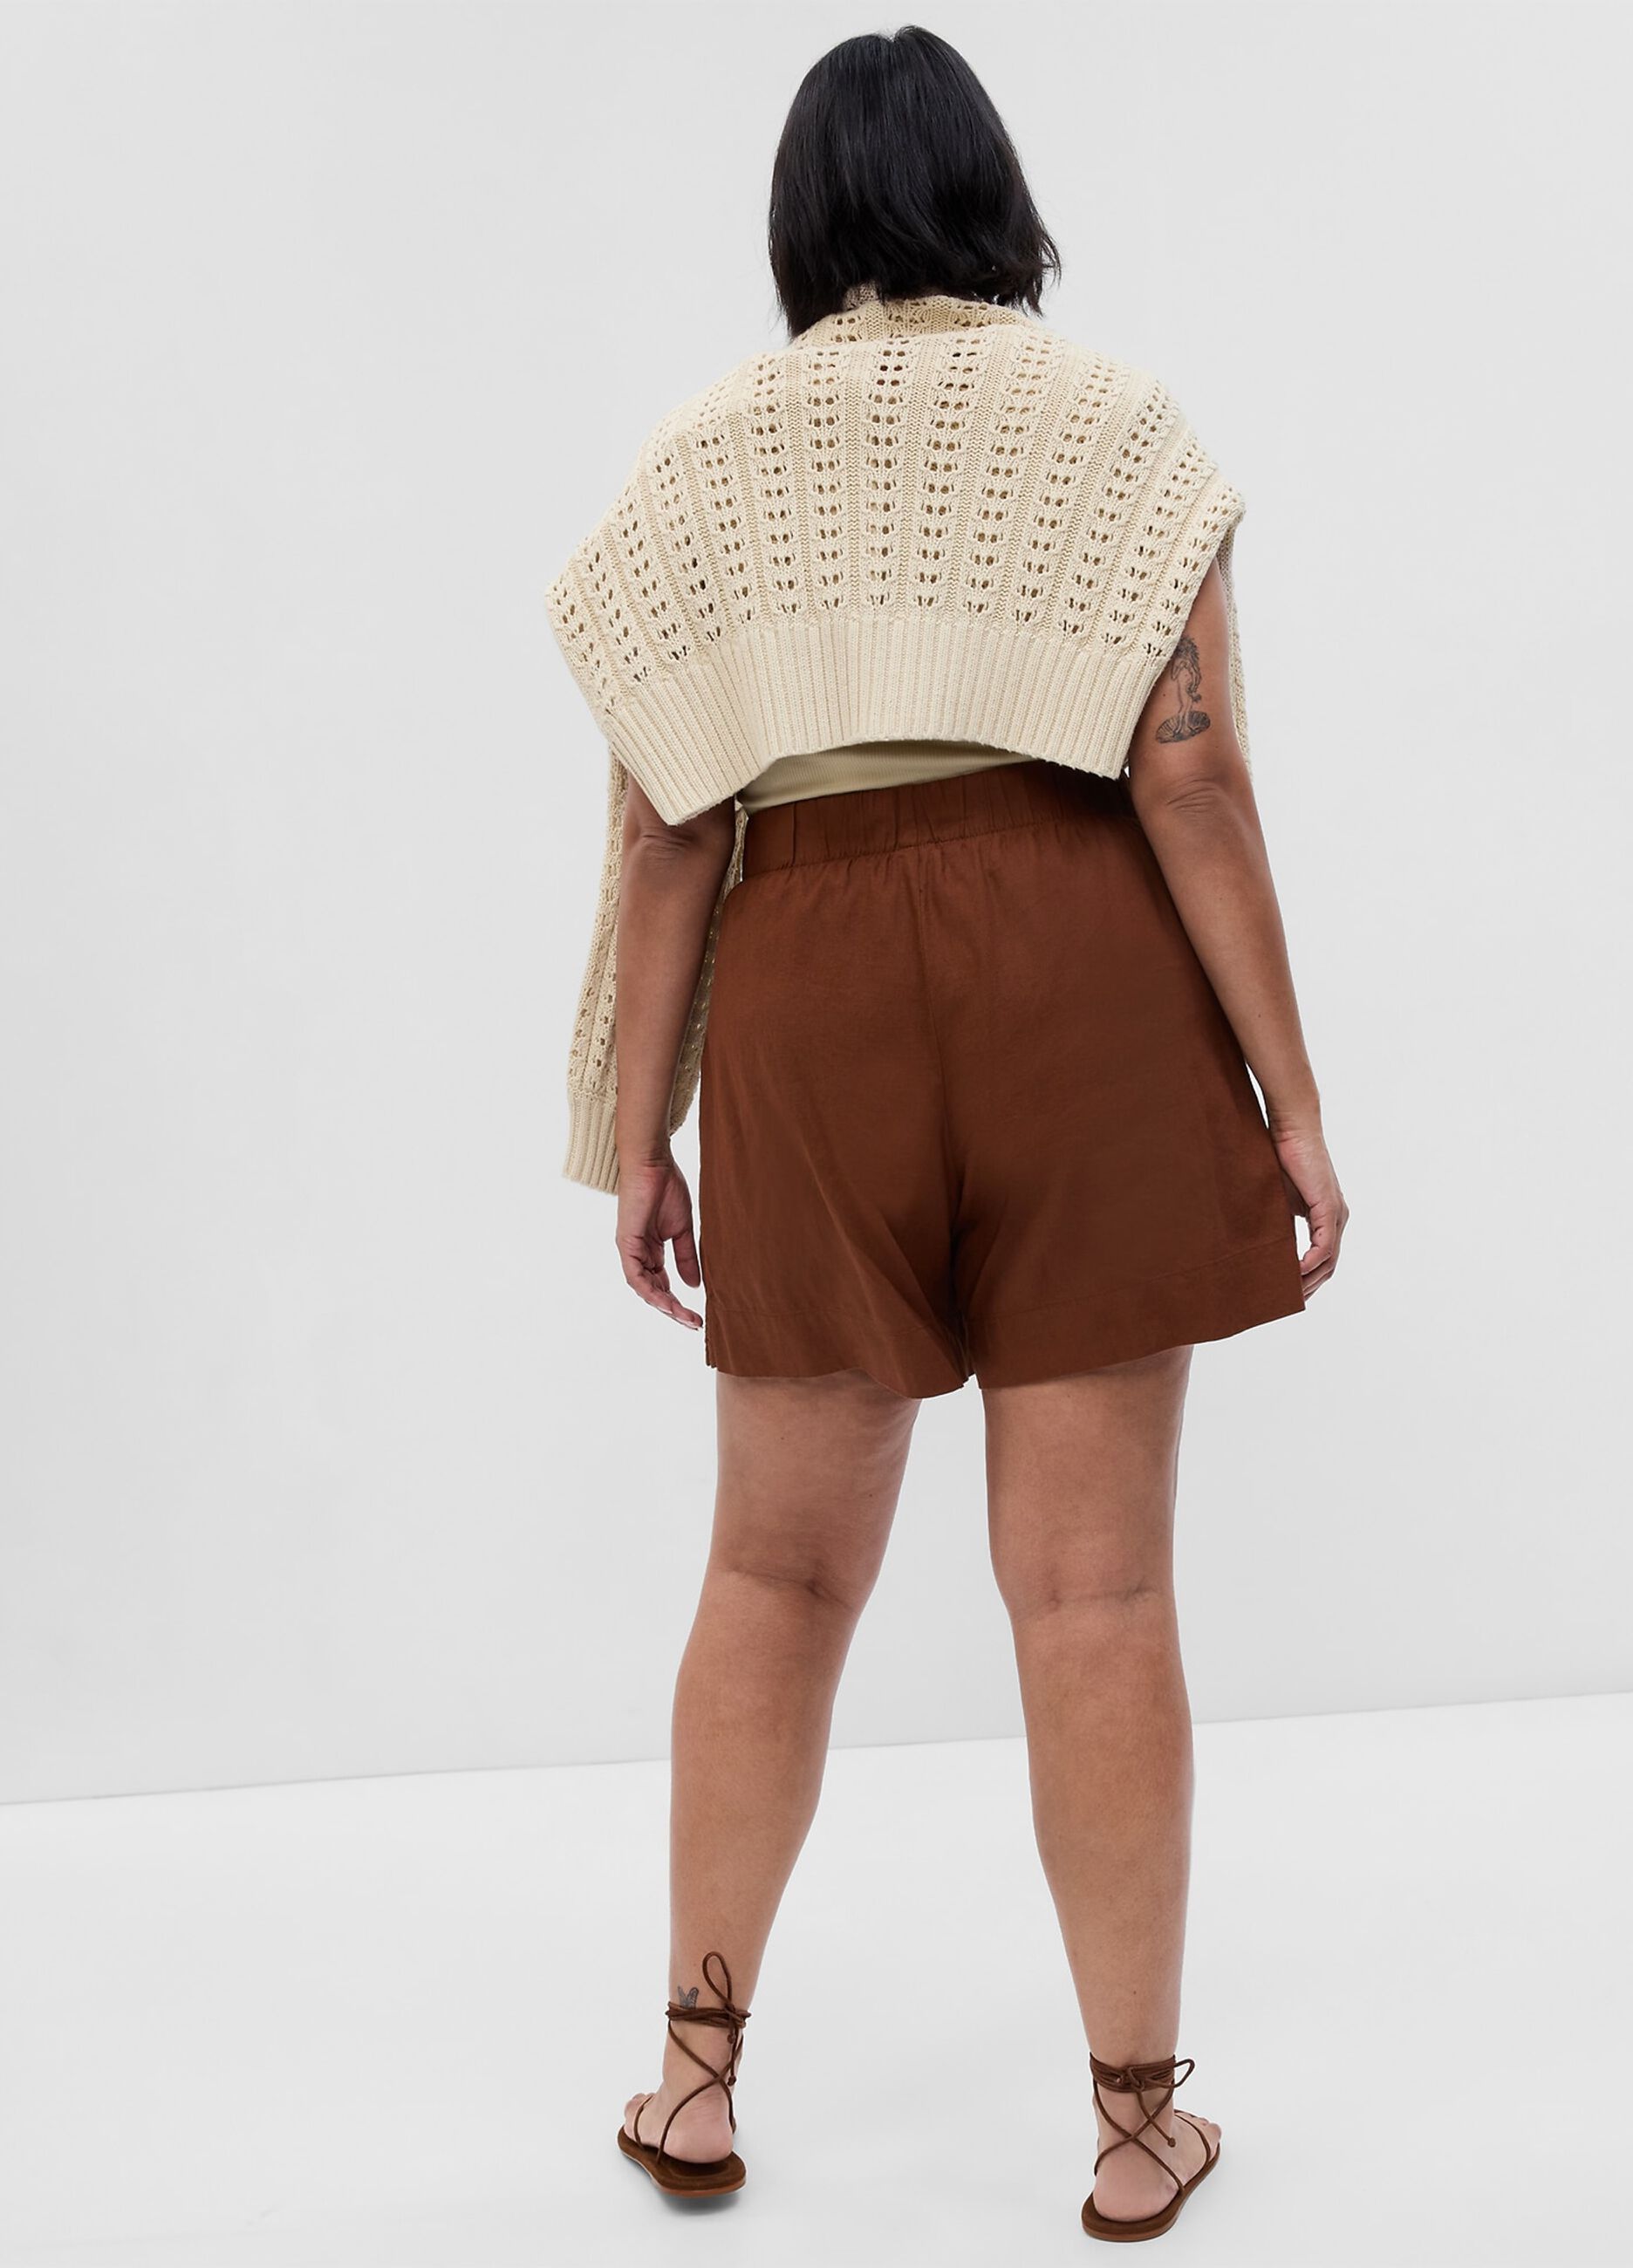 Linen and viscose pull-on shorts